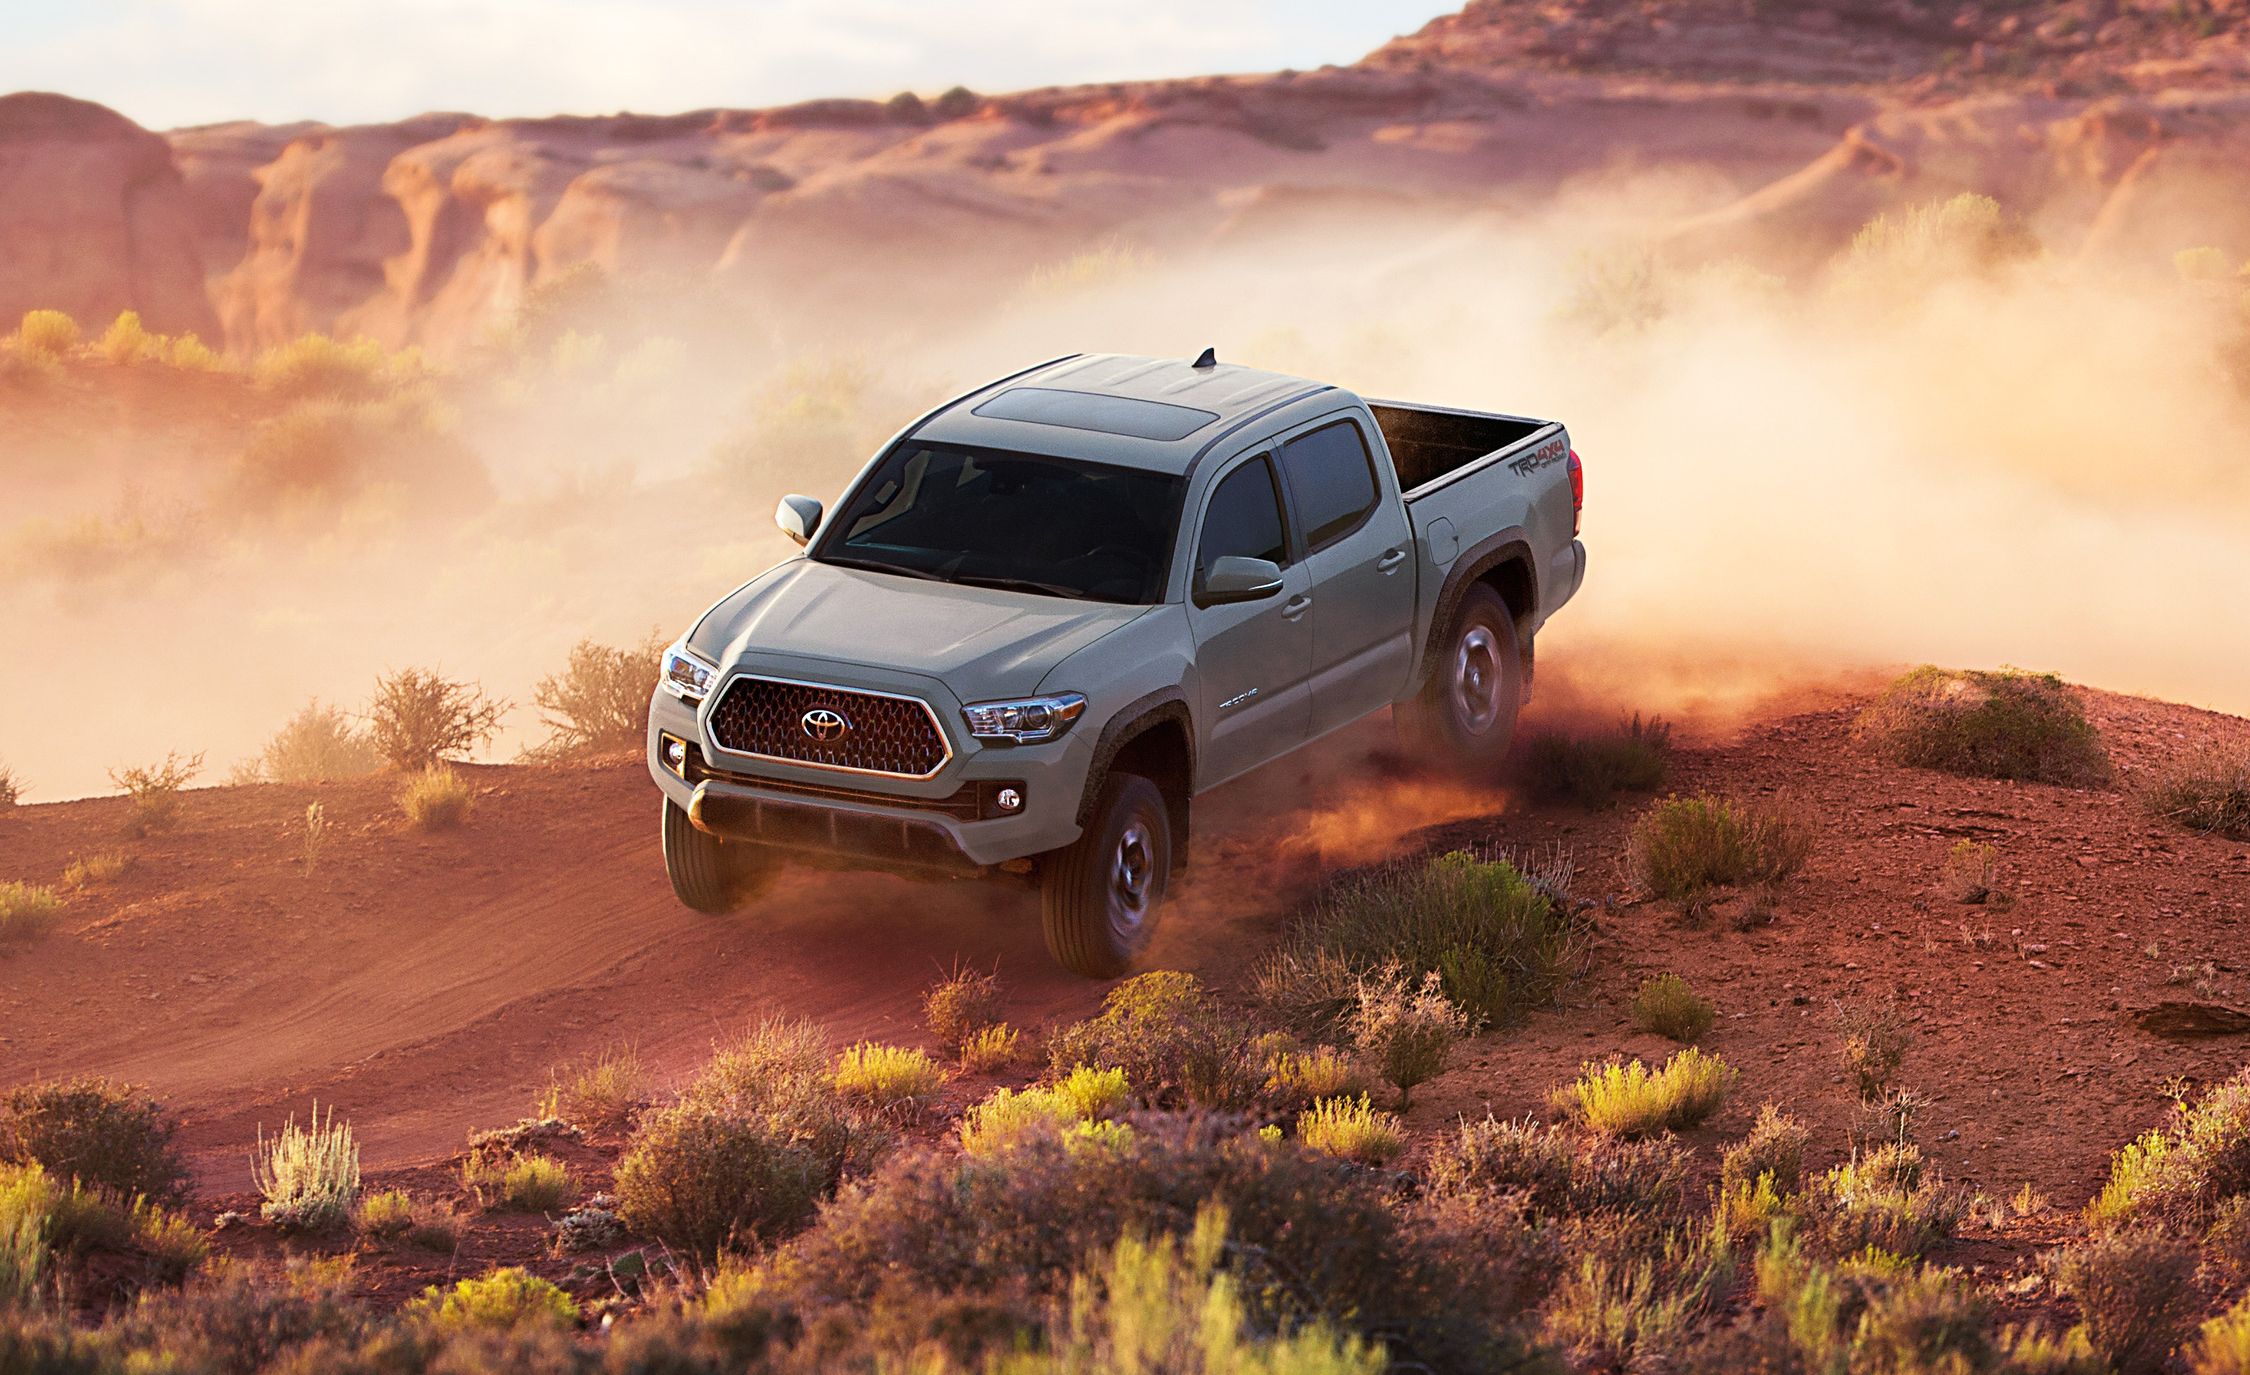 Toyota Tacoma repairs and service